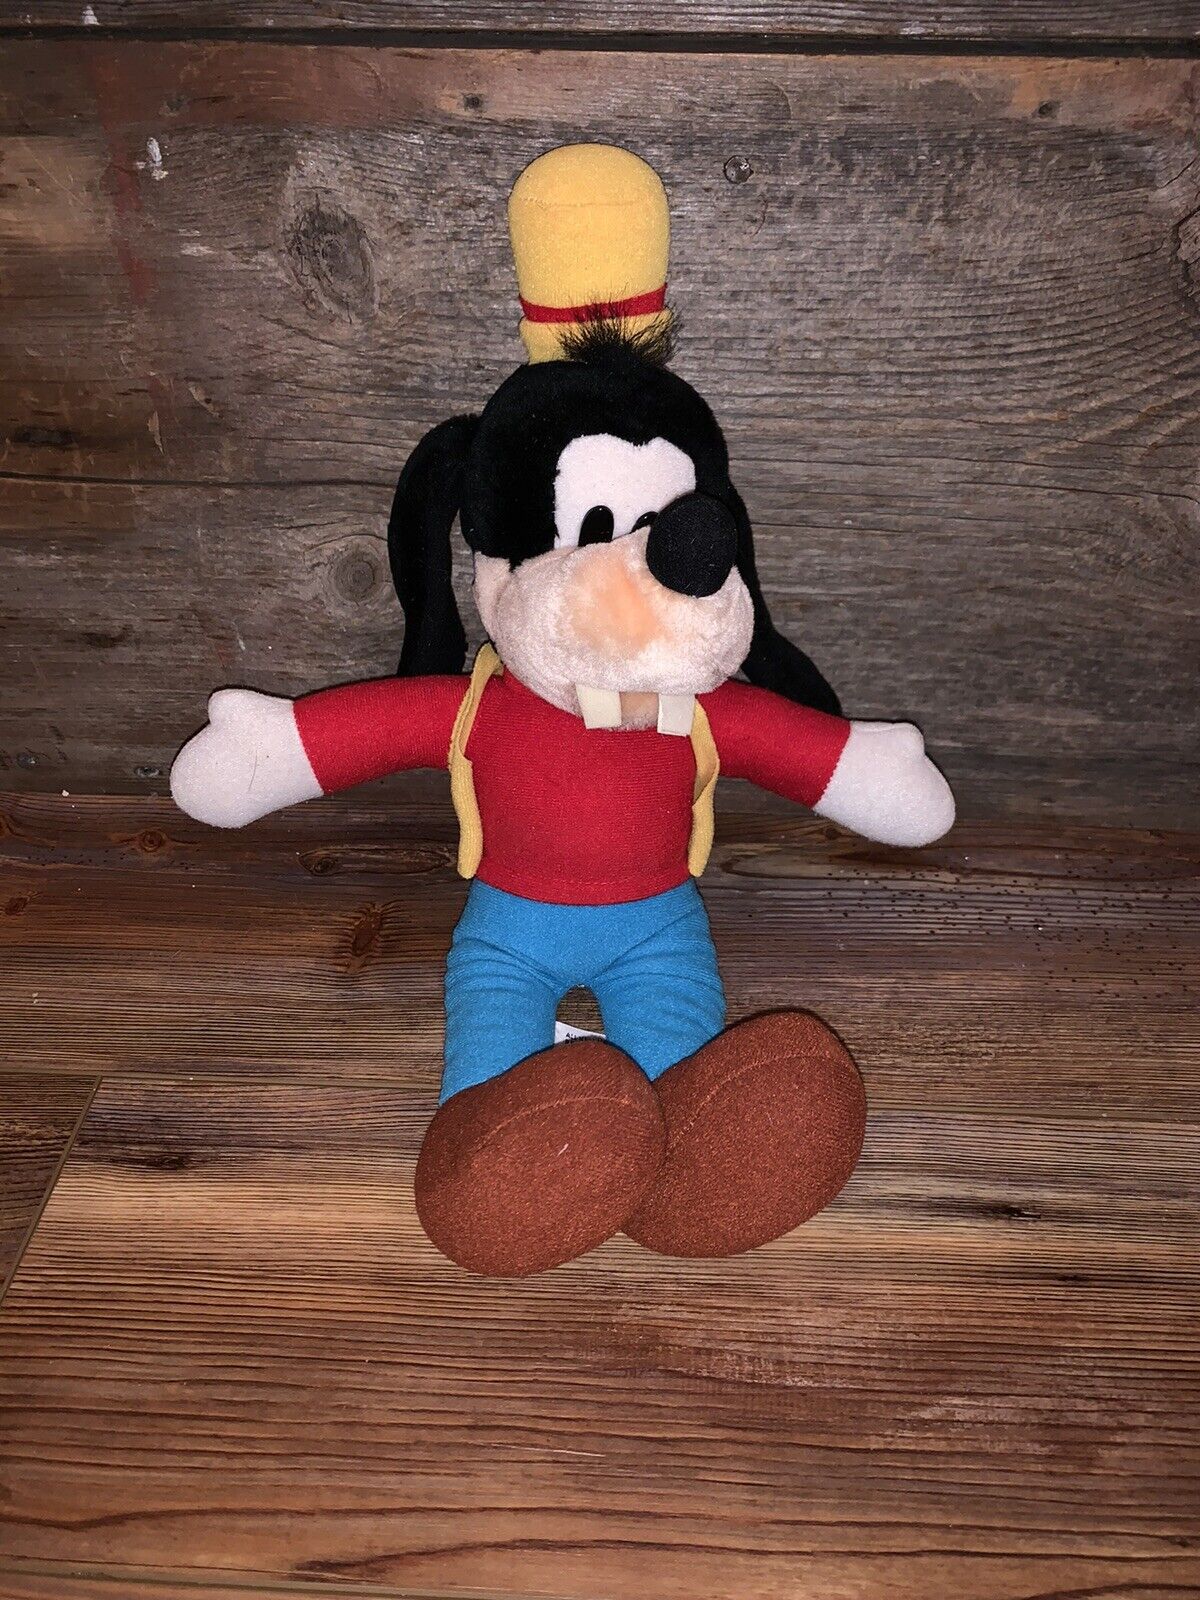 Goofy Plush Made In Korea PA528 In Good But Used Condition With No Stains.